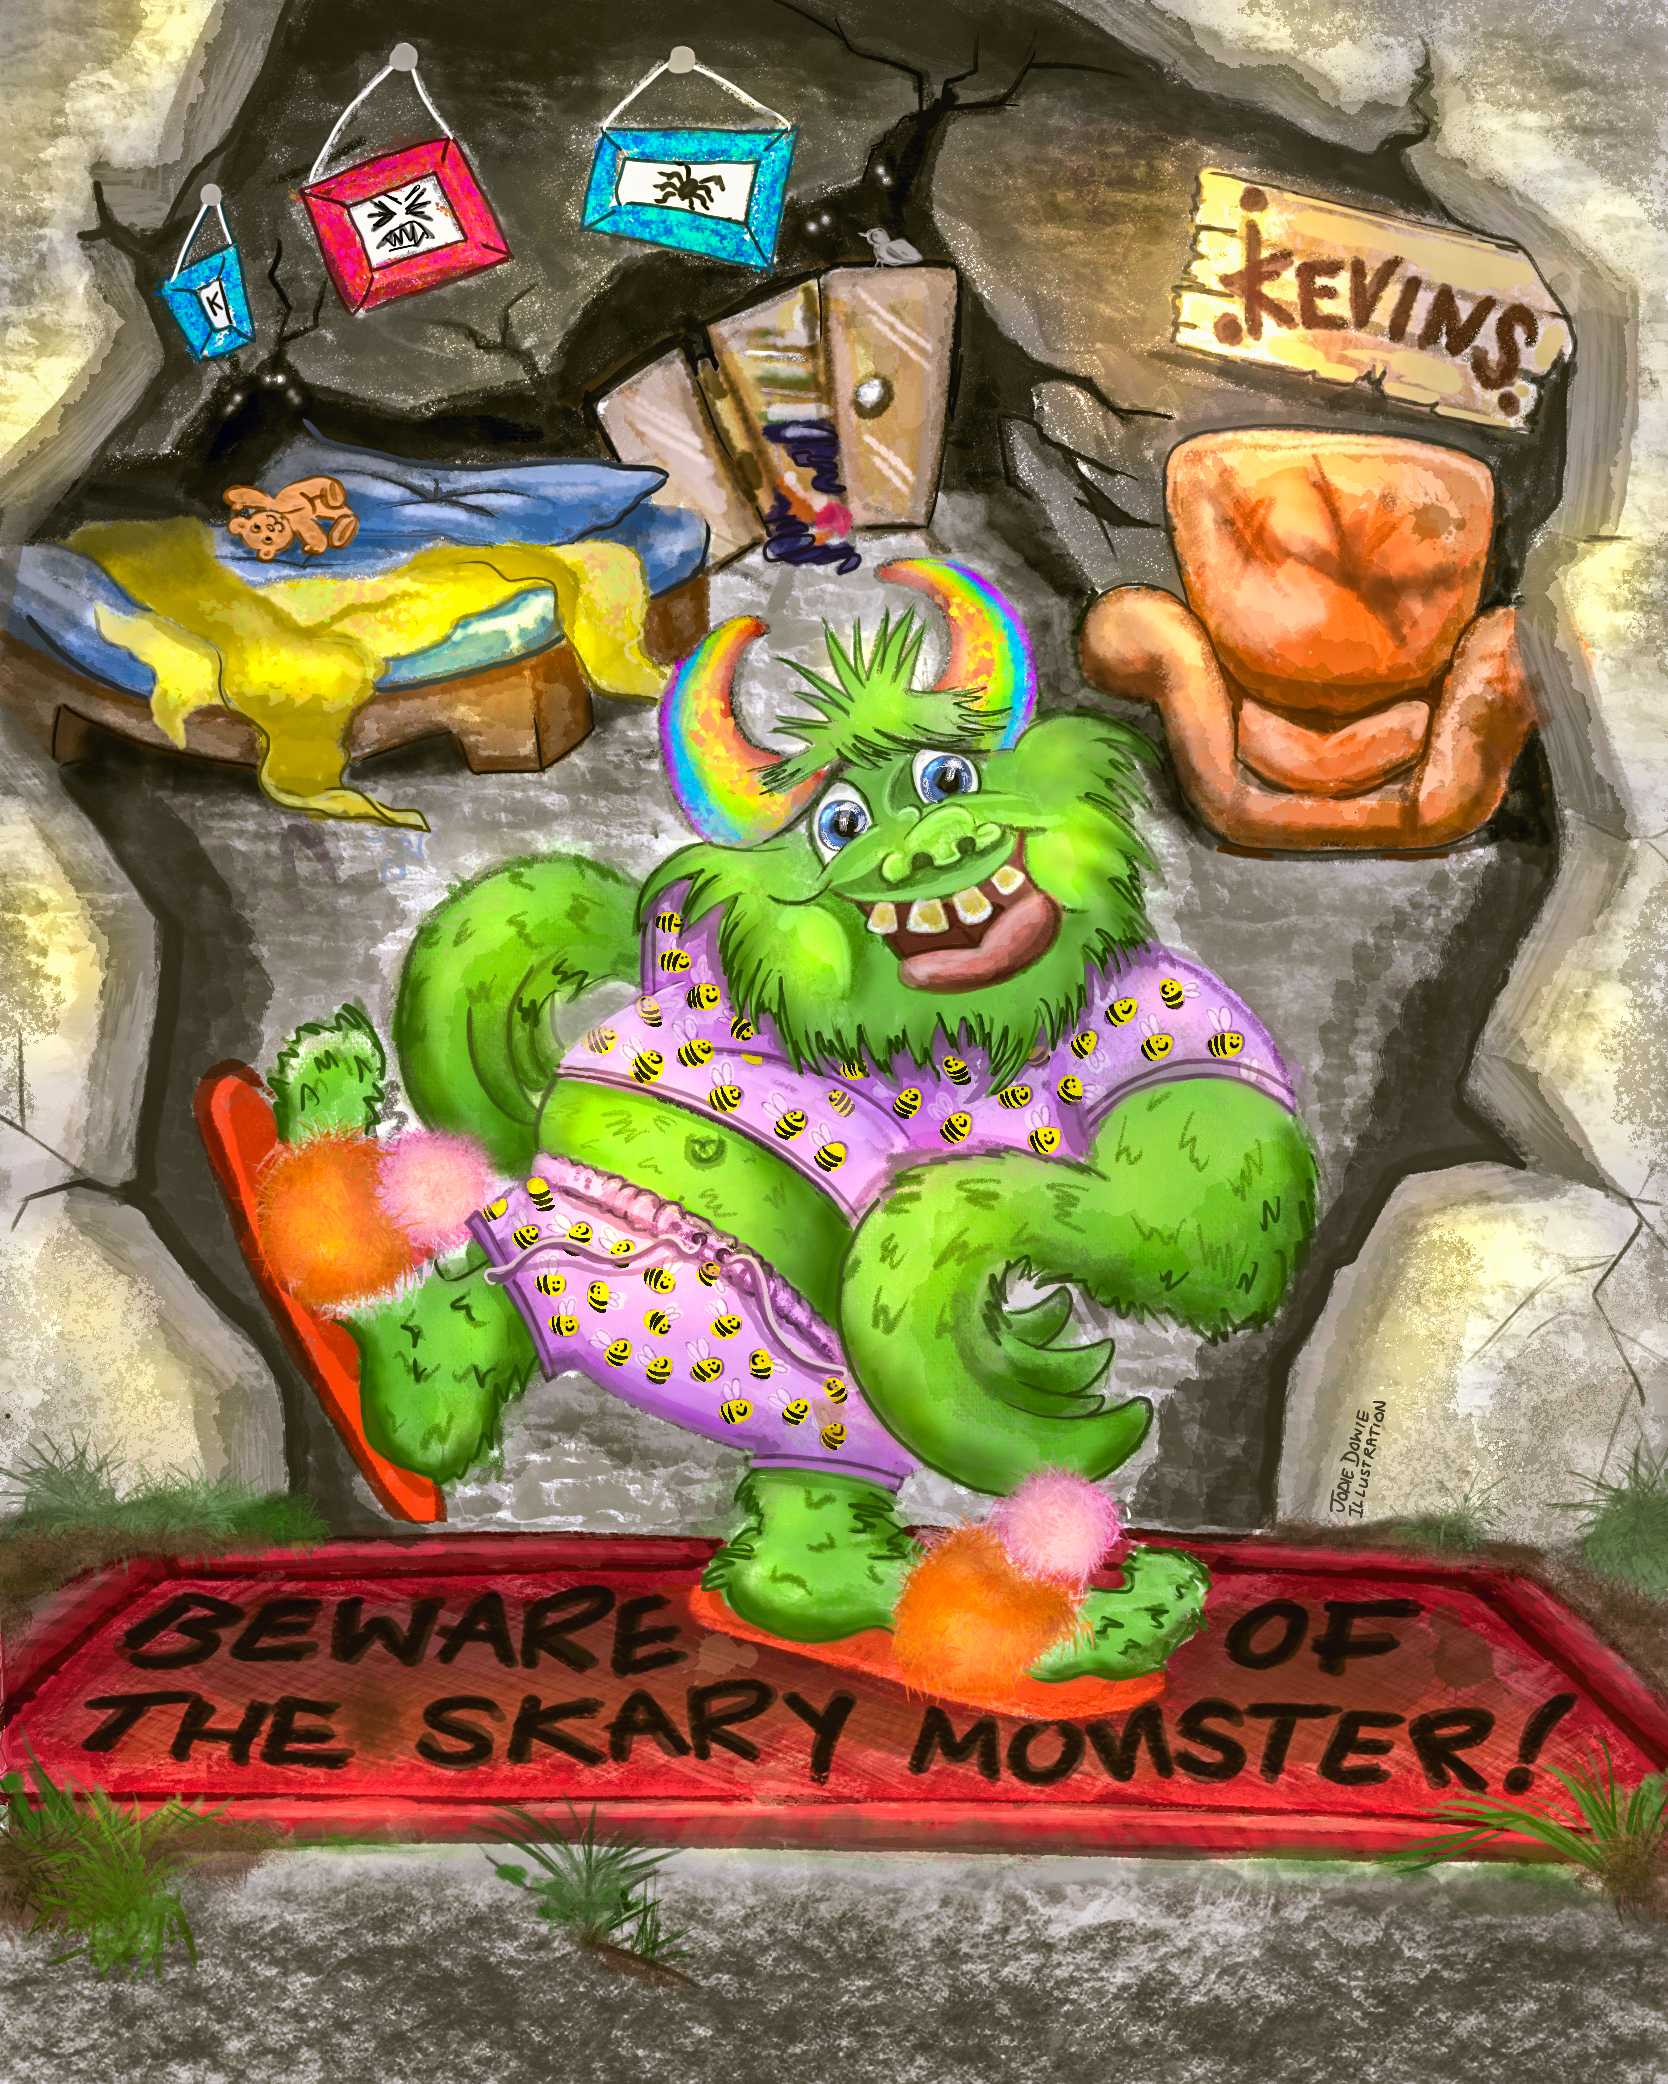 An Illustration of a vwery colourful friendly monster. He is green. He wears pink polka dot pyjamas and fluffy red slippers.